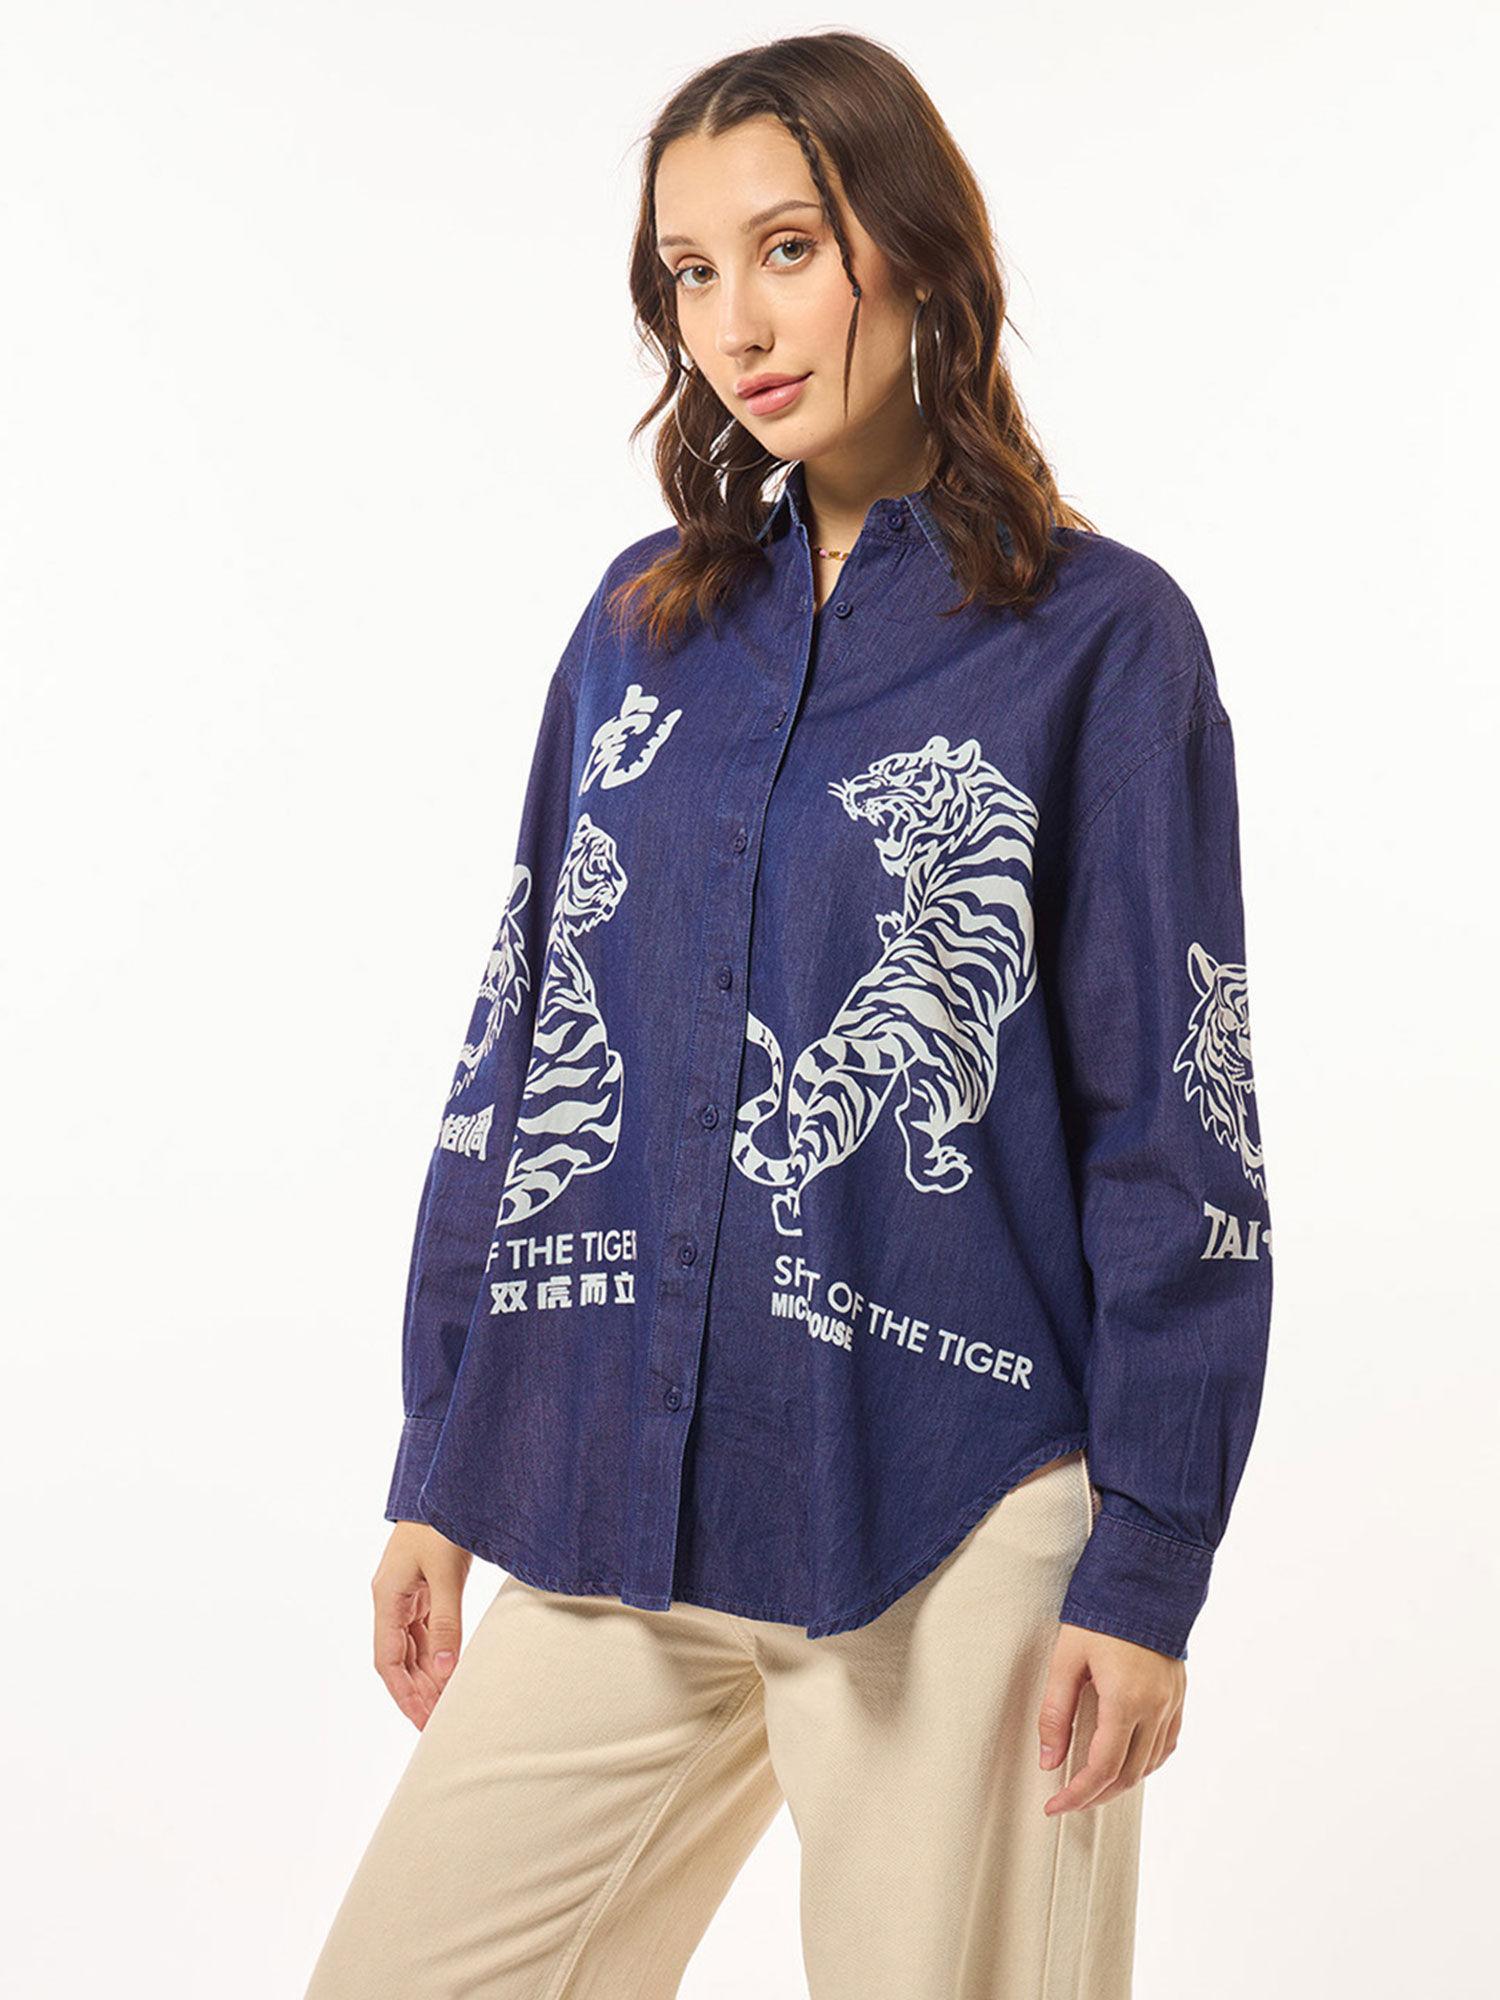 official disney women's blue spirit of tiger graphic printed oversized shirt